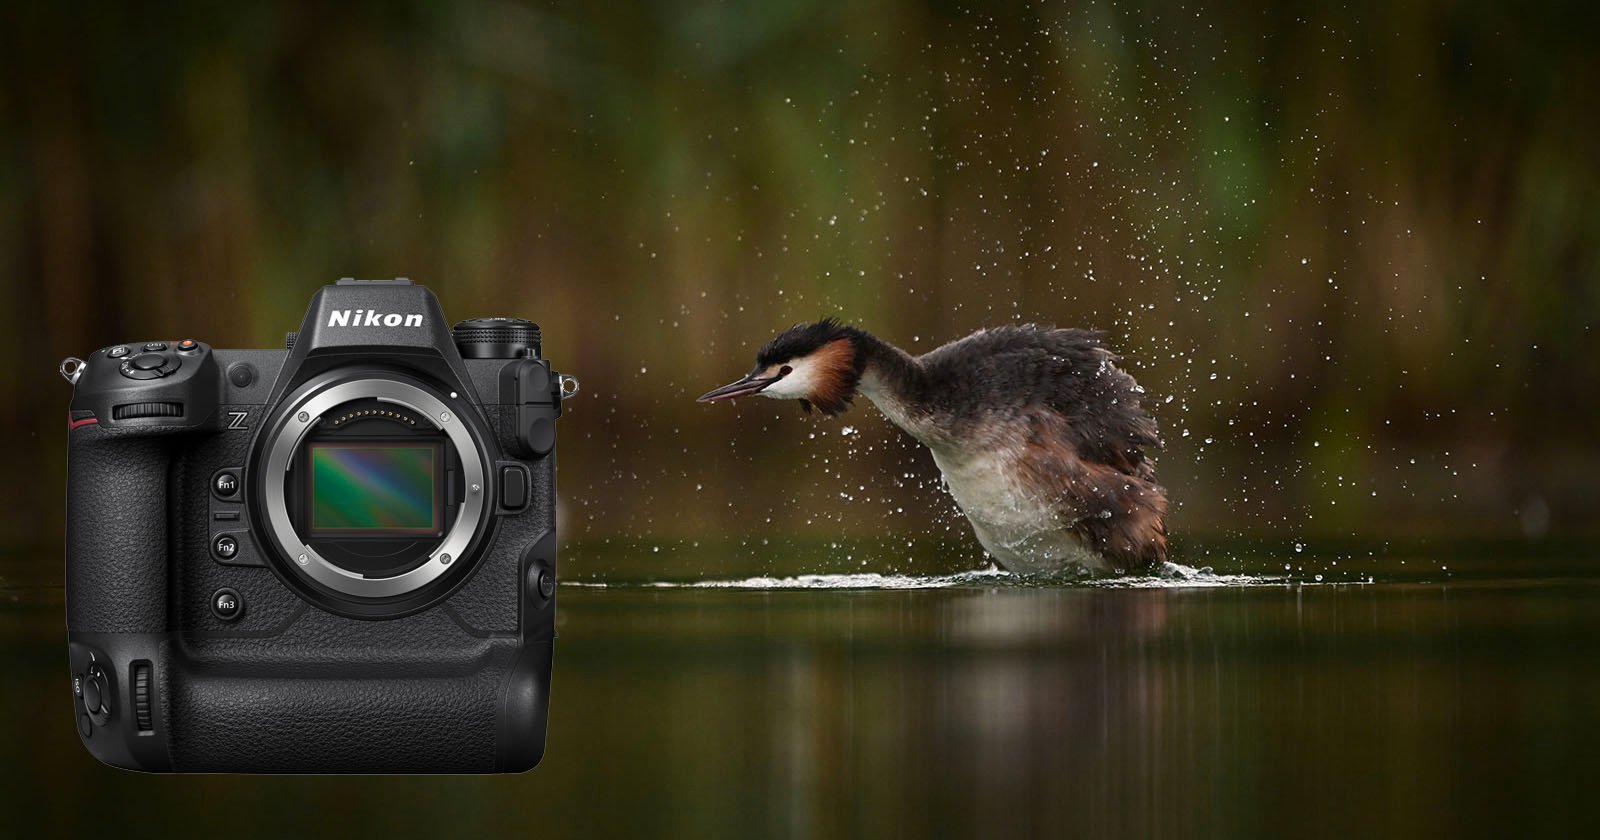 Nikons Fourth Firmware Upgrade for the Z9 Camera Adds Bird Detection